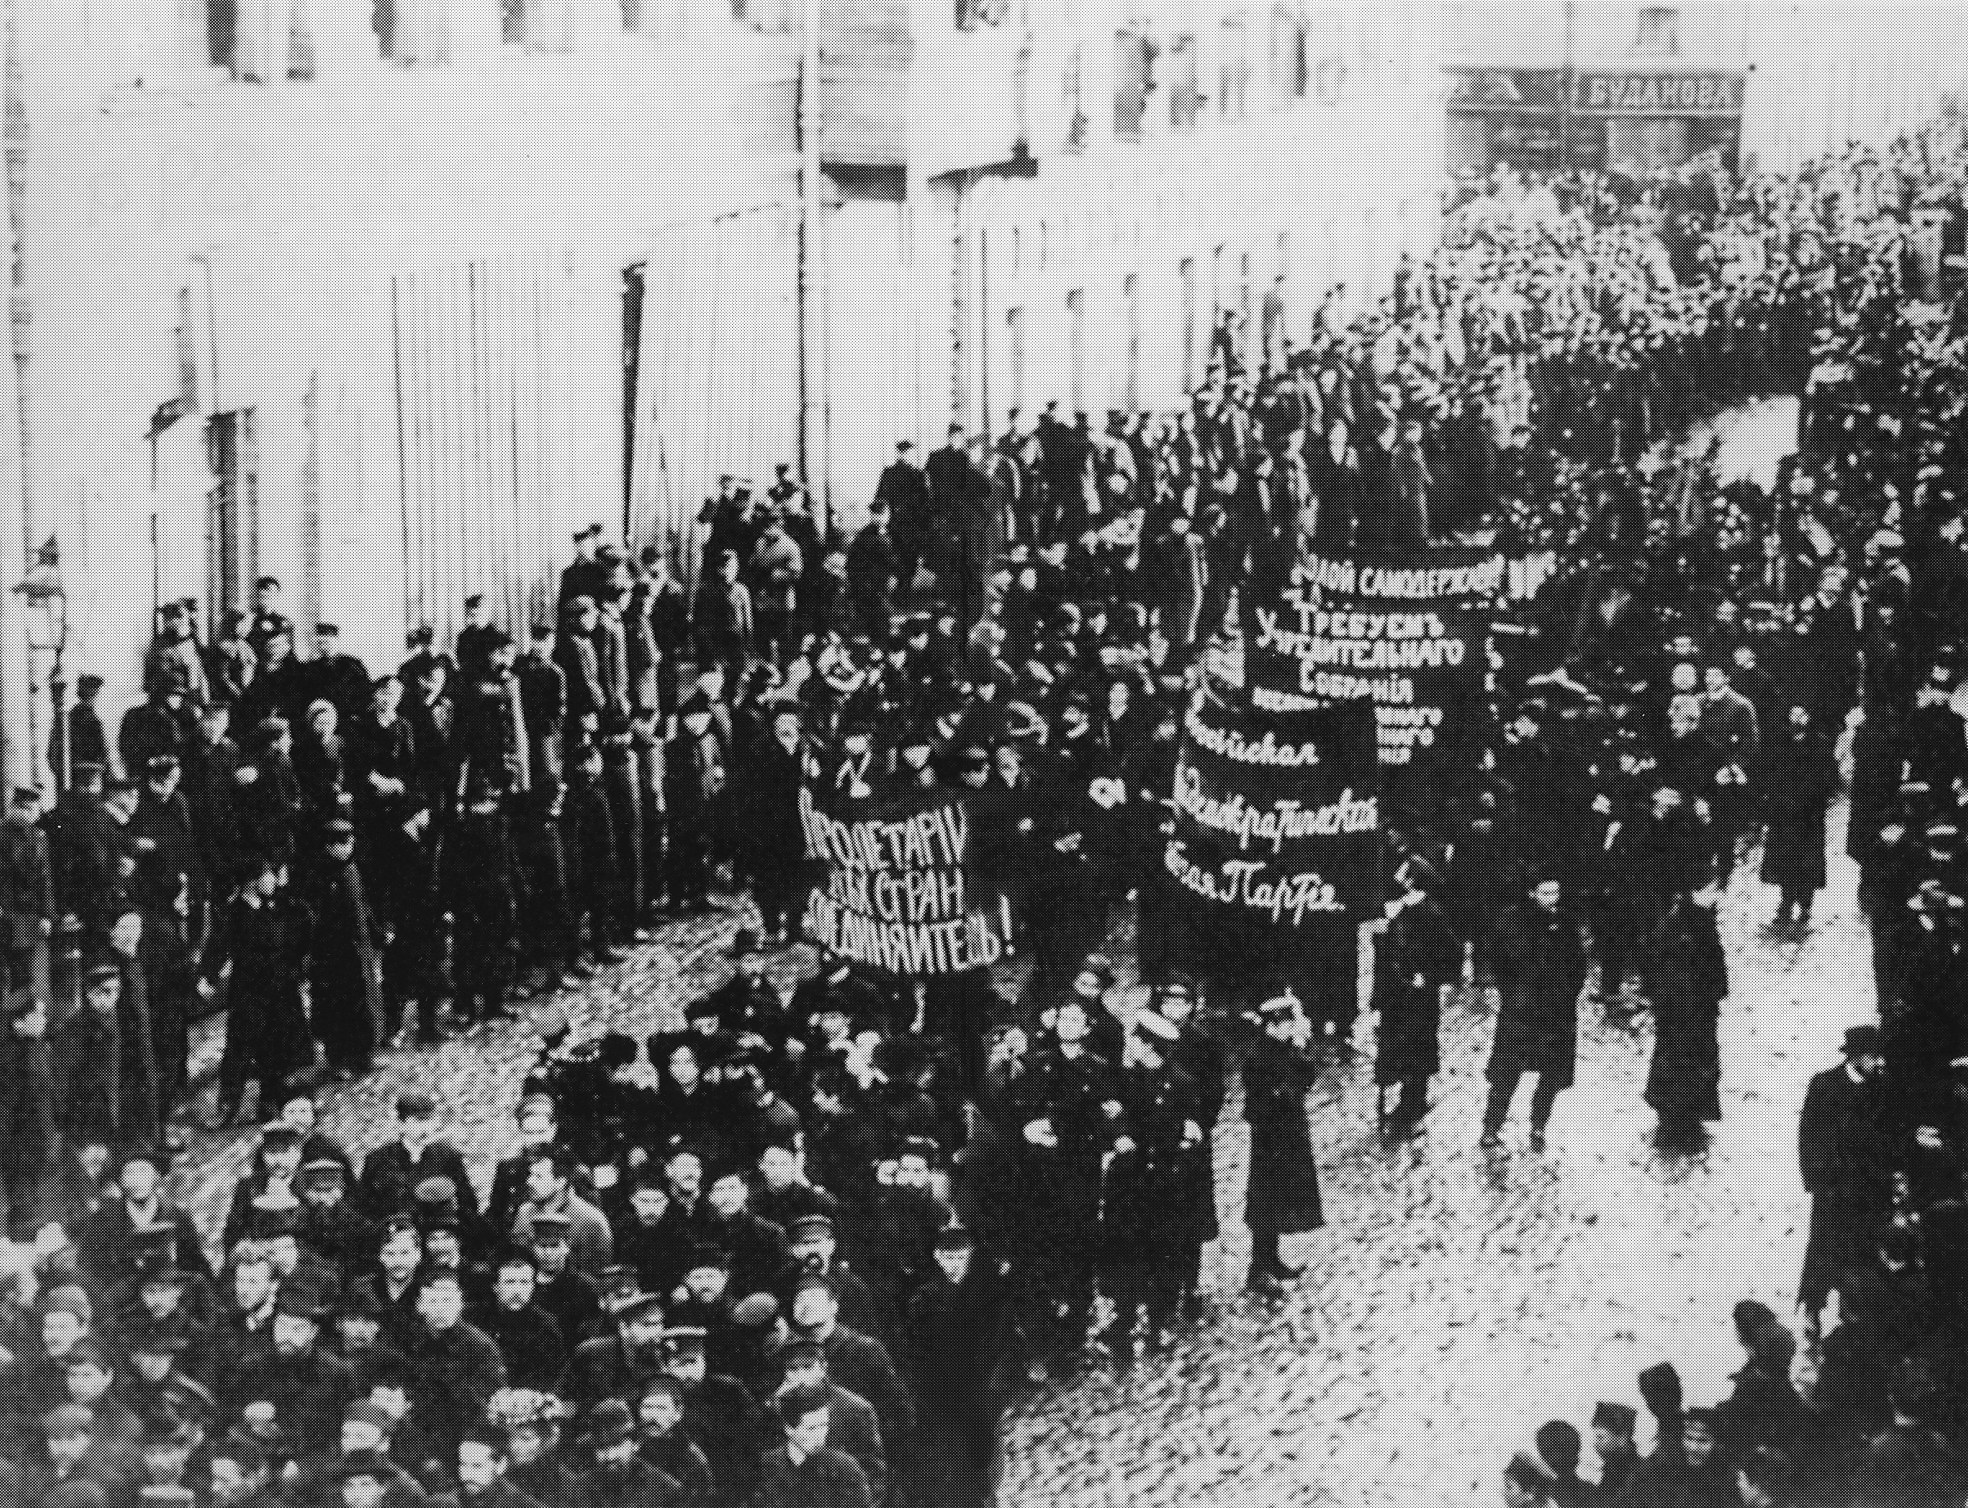 Workers marching through the streets of St. Petersburg, during the 1905 Russian Revolution. The central banner reads 'Proletarians of All Countries Unite' [Photo from Socialist Worker Archives].